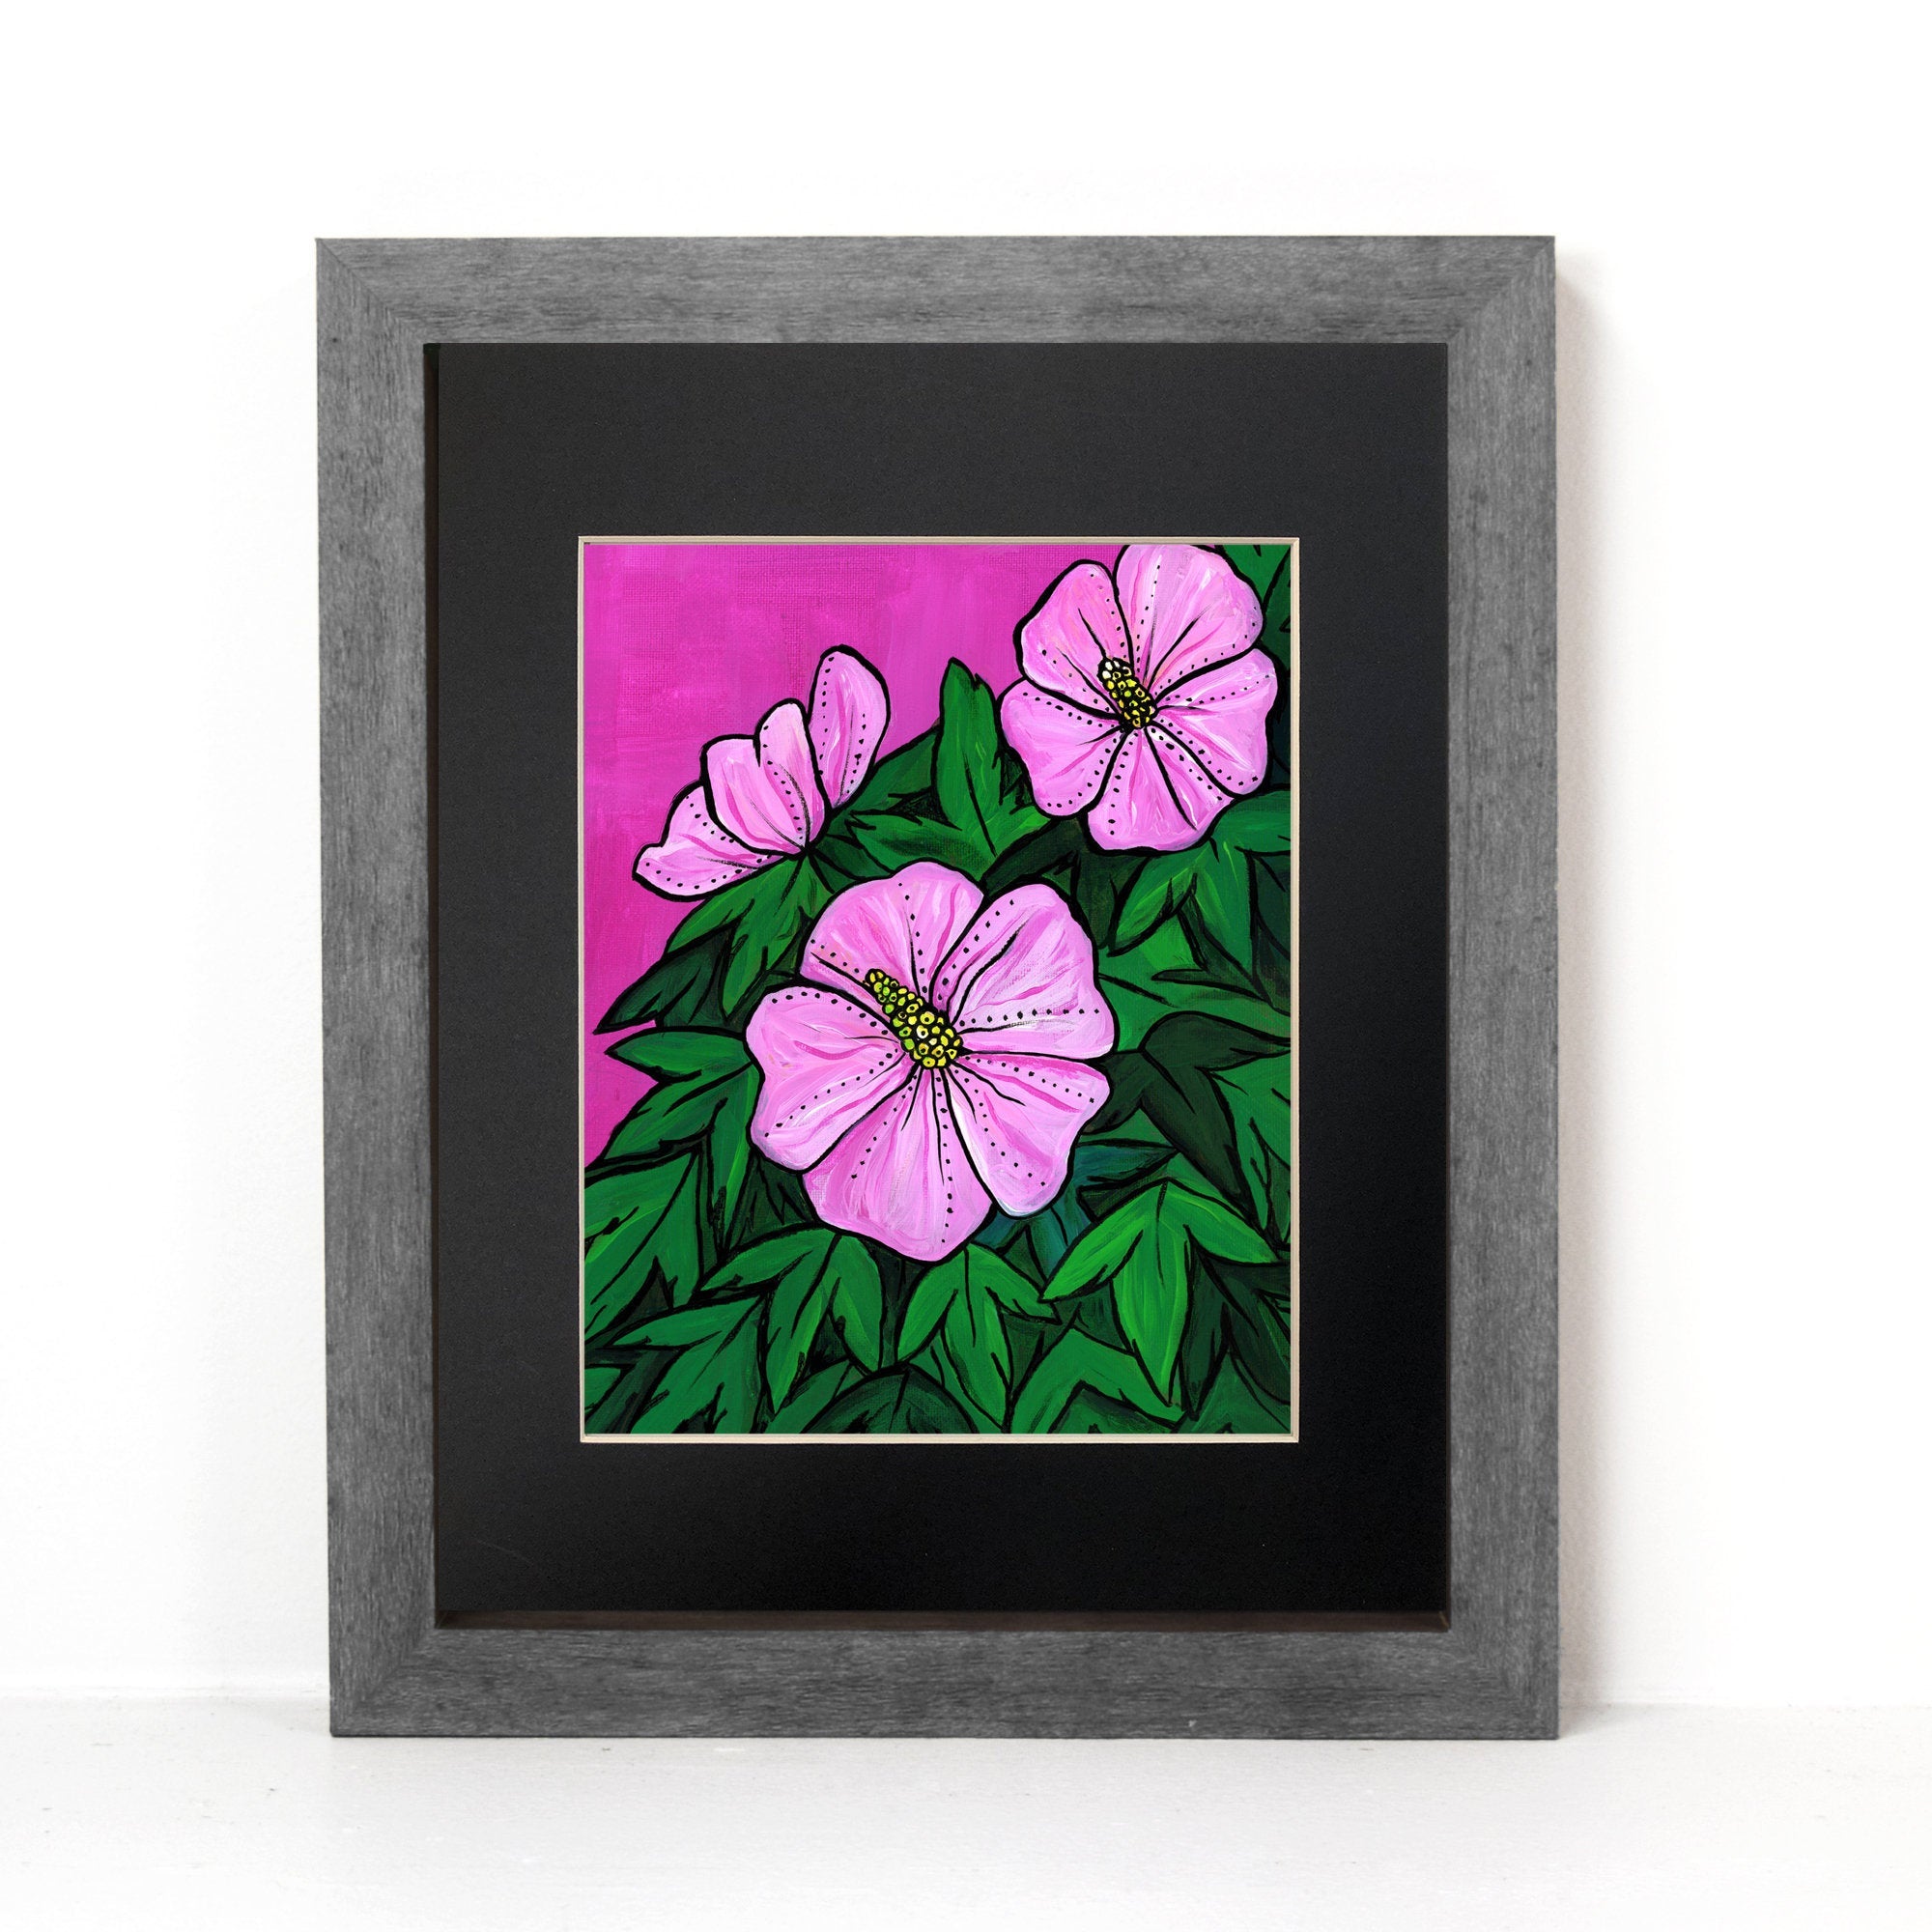 Pink Hibiscus Art Print - Tropical Flower Print - Pink and Green Floral Wall Art Decor by Claudine Intner - 8x10 with optional mat